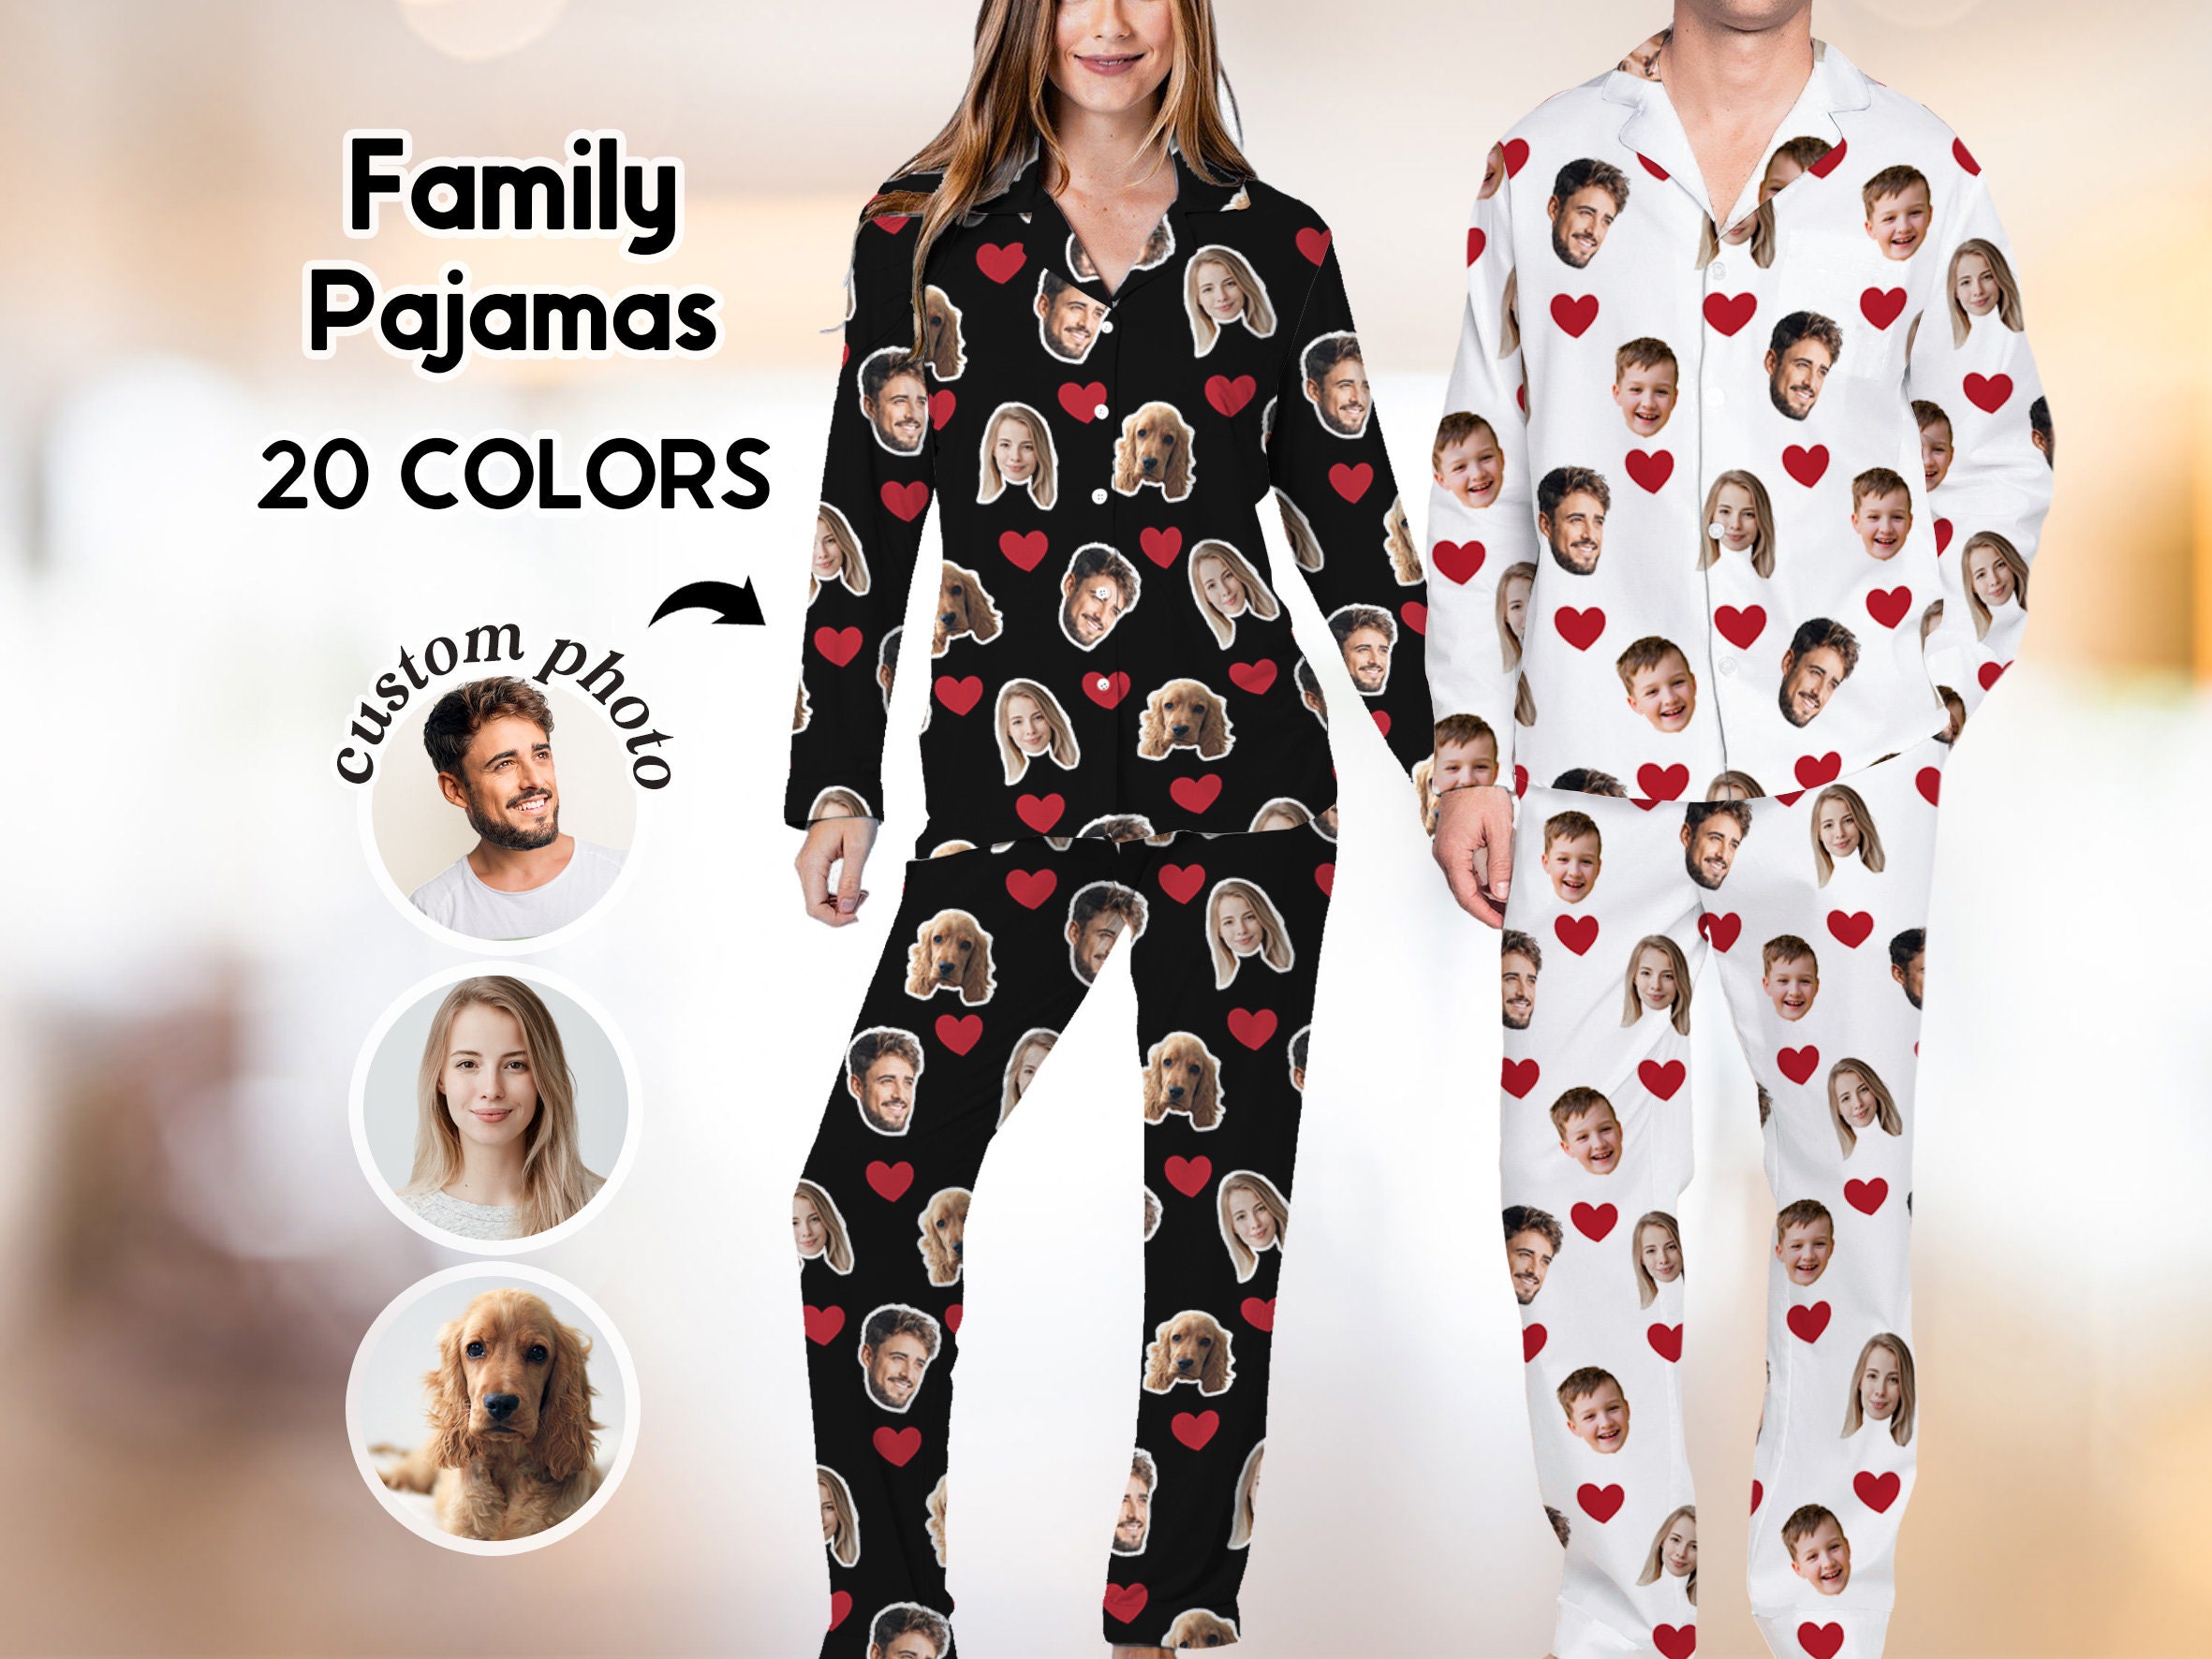 Discover Custom Pet Photo Pajamas, Personalized Face Pajama Set, Dod Cat Photo Pajamas, Valentine's Day Gift, Pet Lover Gift, Gift for Mom Dad Family